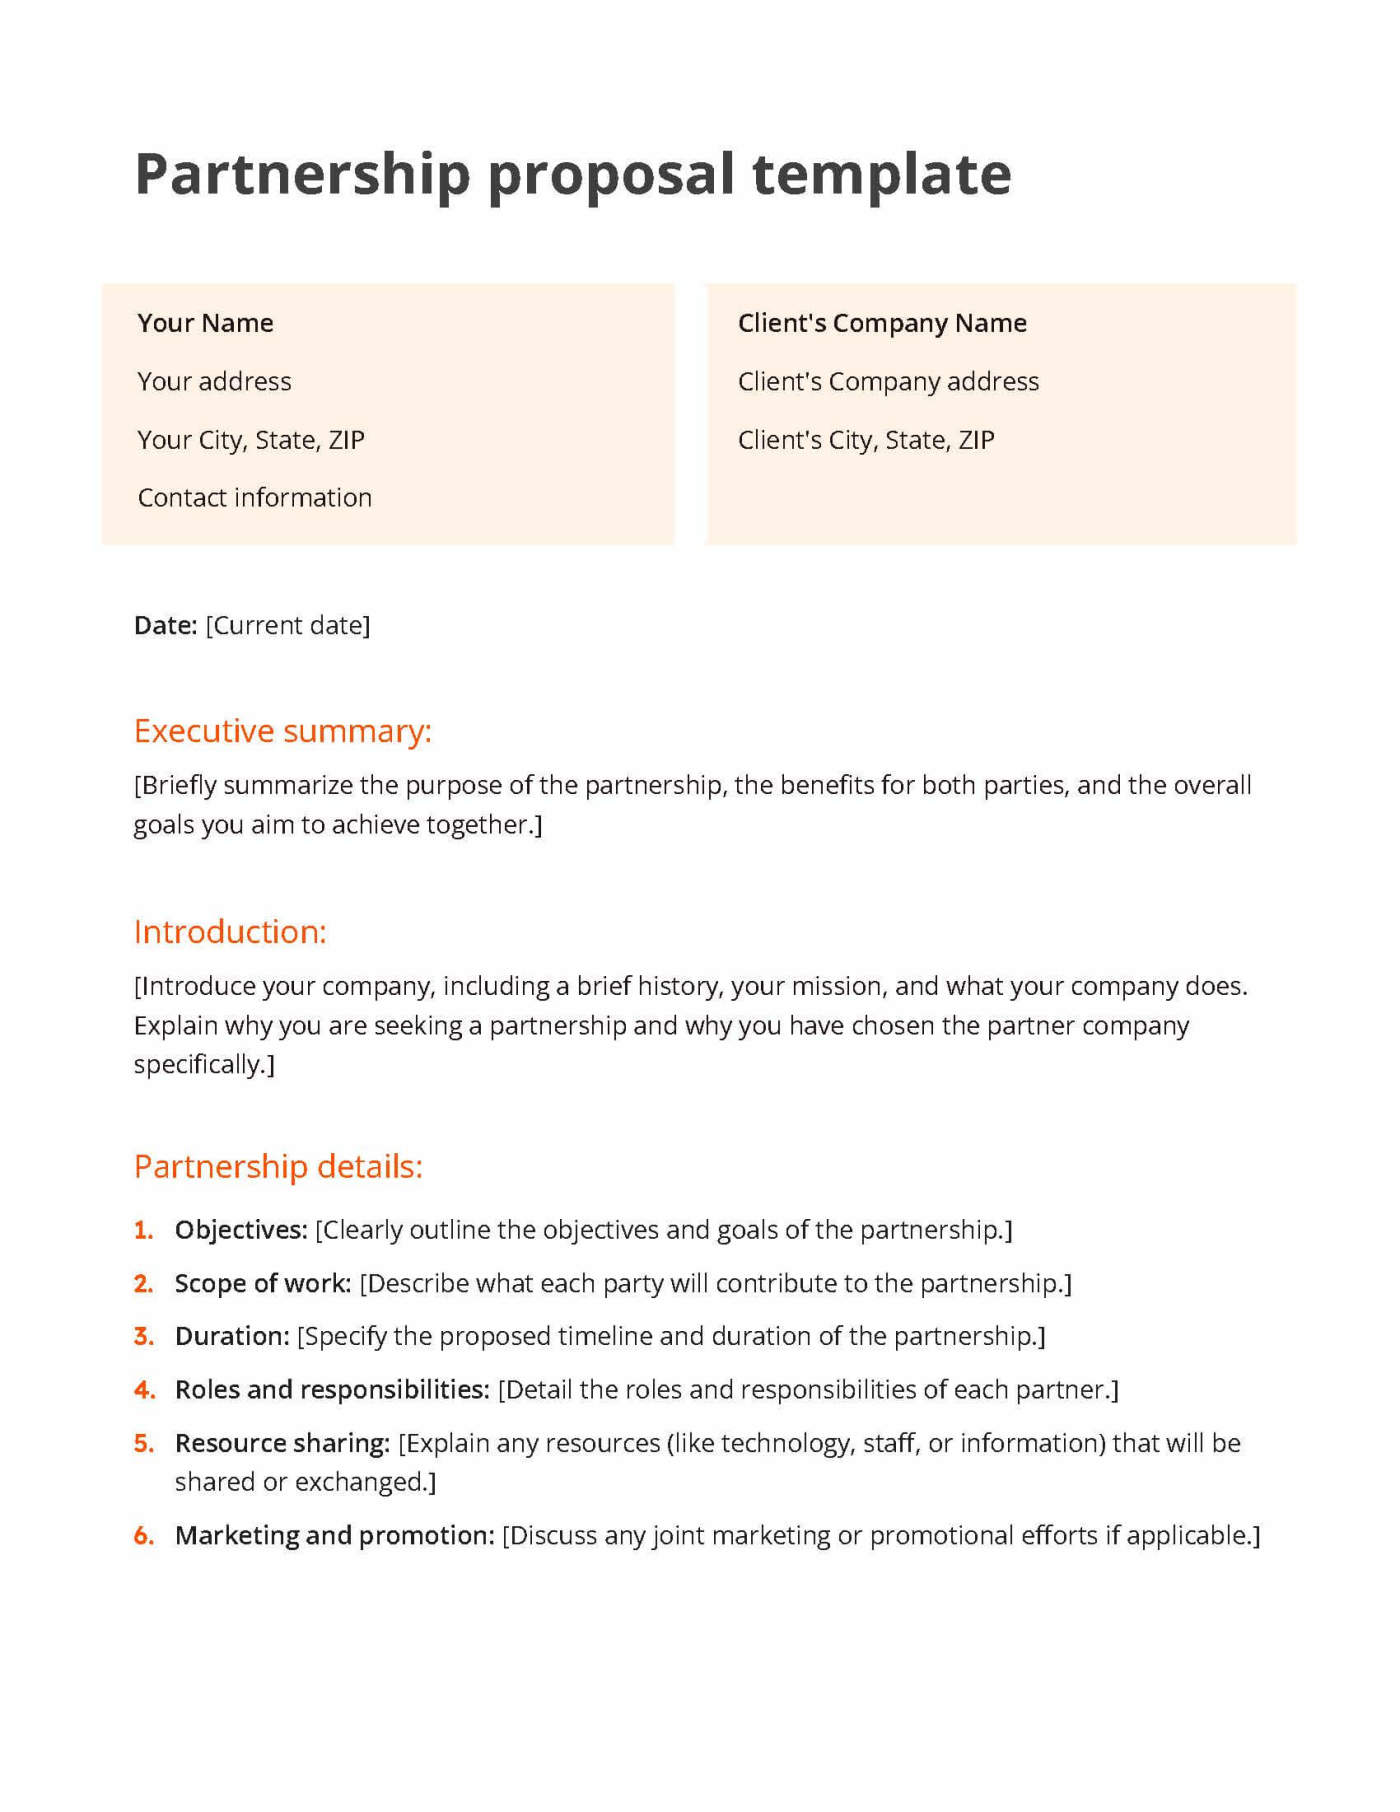 White and orange partnership proposal template including a section for the introduction, executive summary, and partnership details